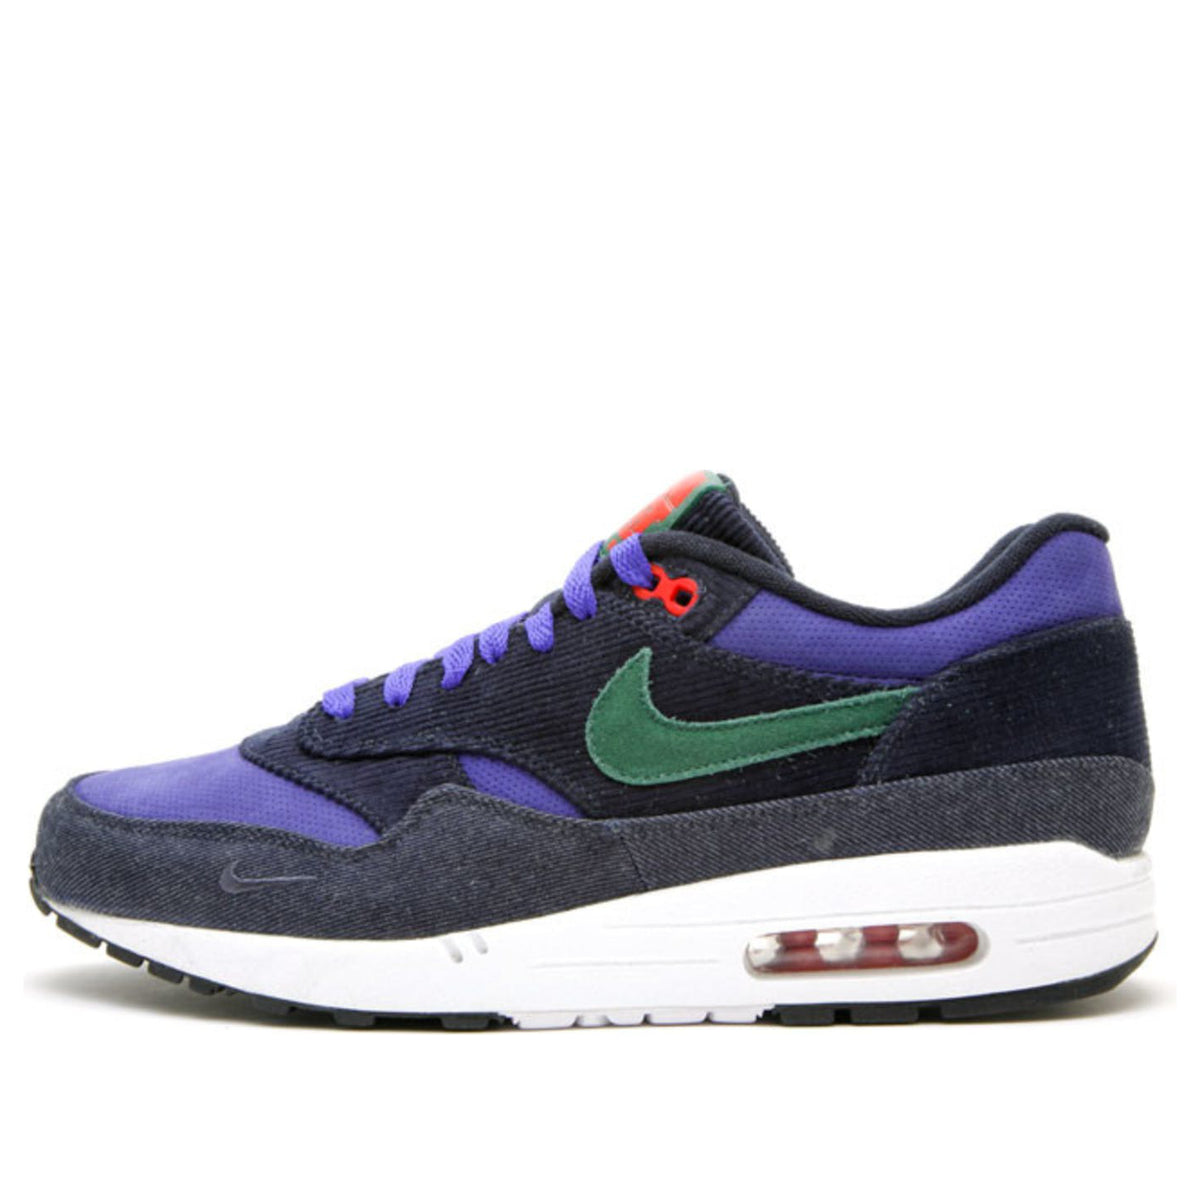 Nike Air Max 1 Patta Waves Black for Sale, Authenticity Guaranteed